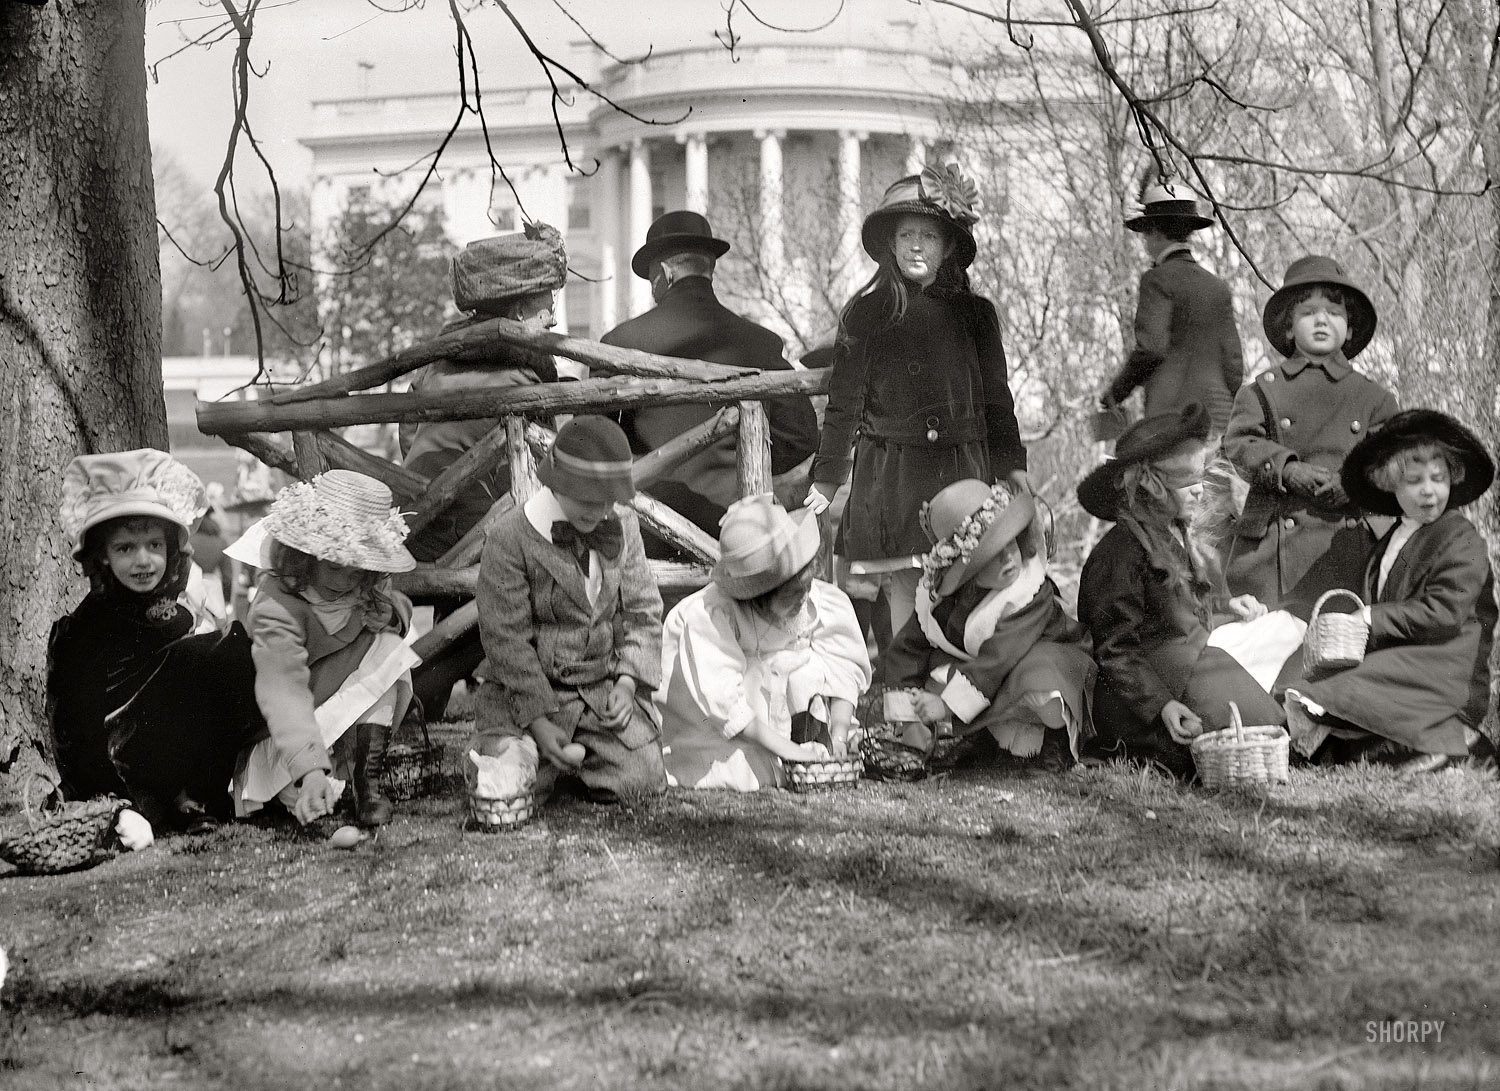 "Easter egg rolling at White House, 1911." Harris & Ewing. View full size.